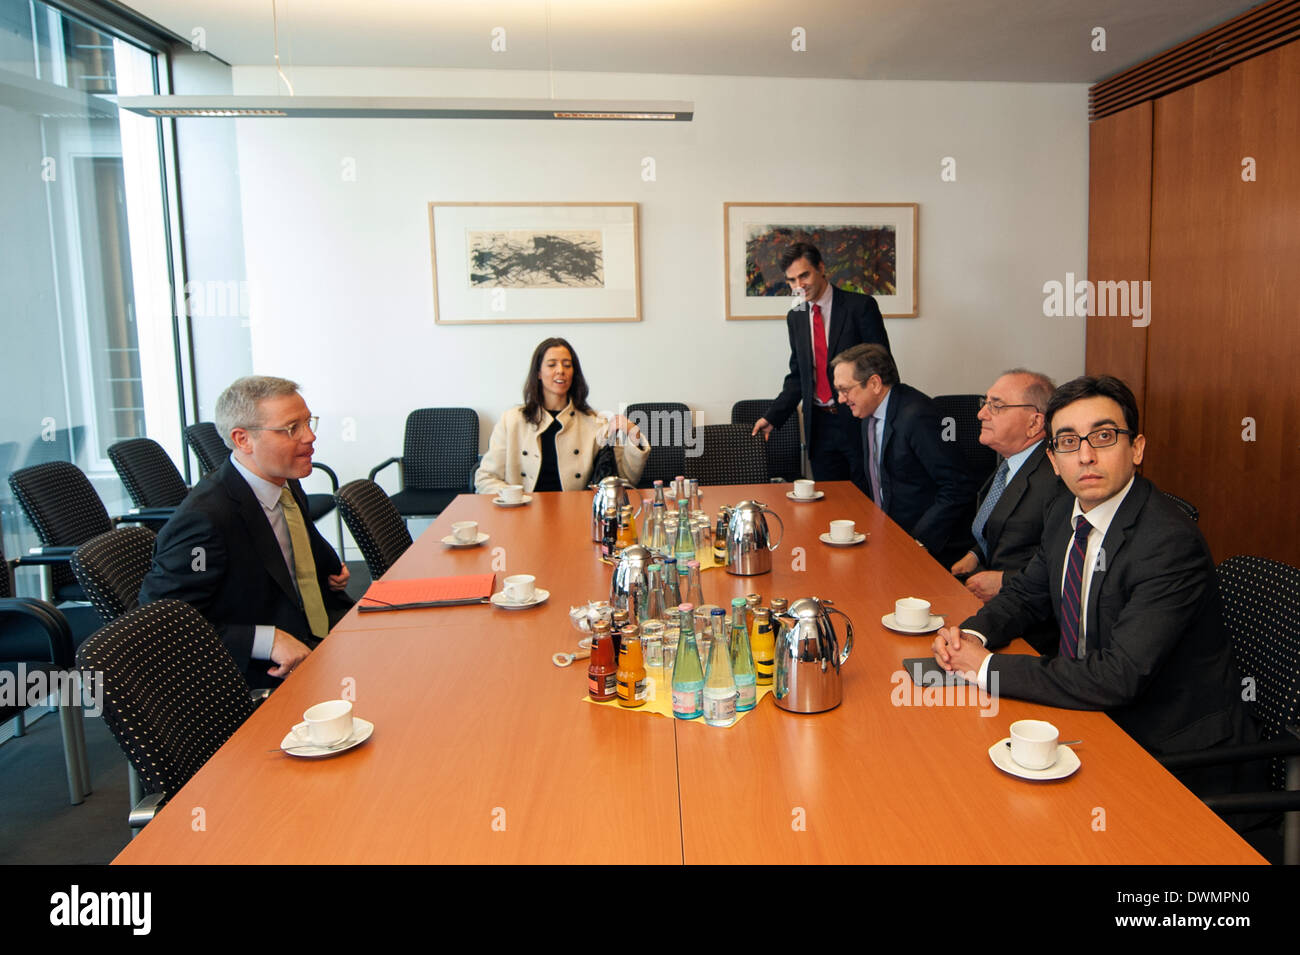 Berlin, Germany. 10th Mar, 2014. Minister for Foreign Affairs, Dr. Rui Machete had a meeting with the Chairman of the Parliamentary Committee on Foreign Affairs, Dr. Norbert RÃƒÂ¶ttgen in the Bundestag for bilateral conversations. © Goncalo Silva/NurPhoto/ZUMAPRESS.com/Alamy Live News Stock Photo